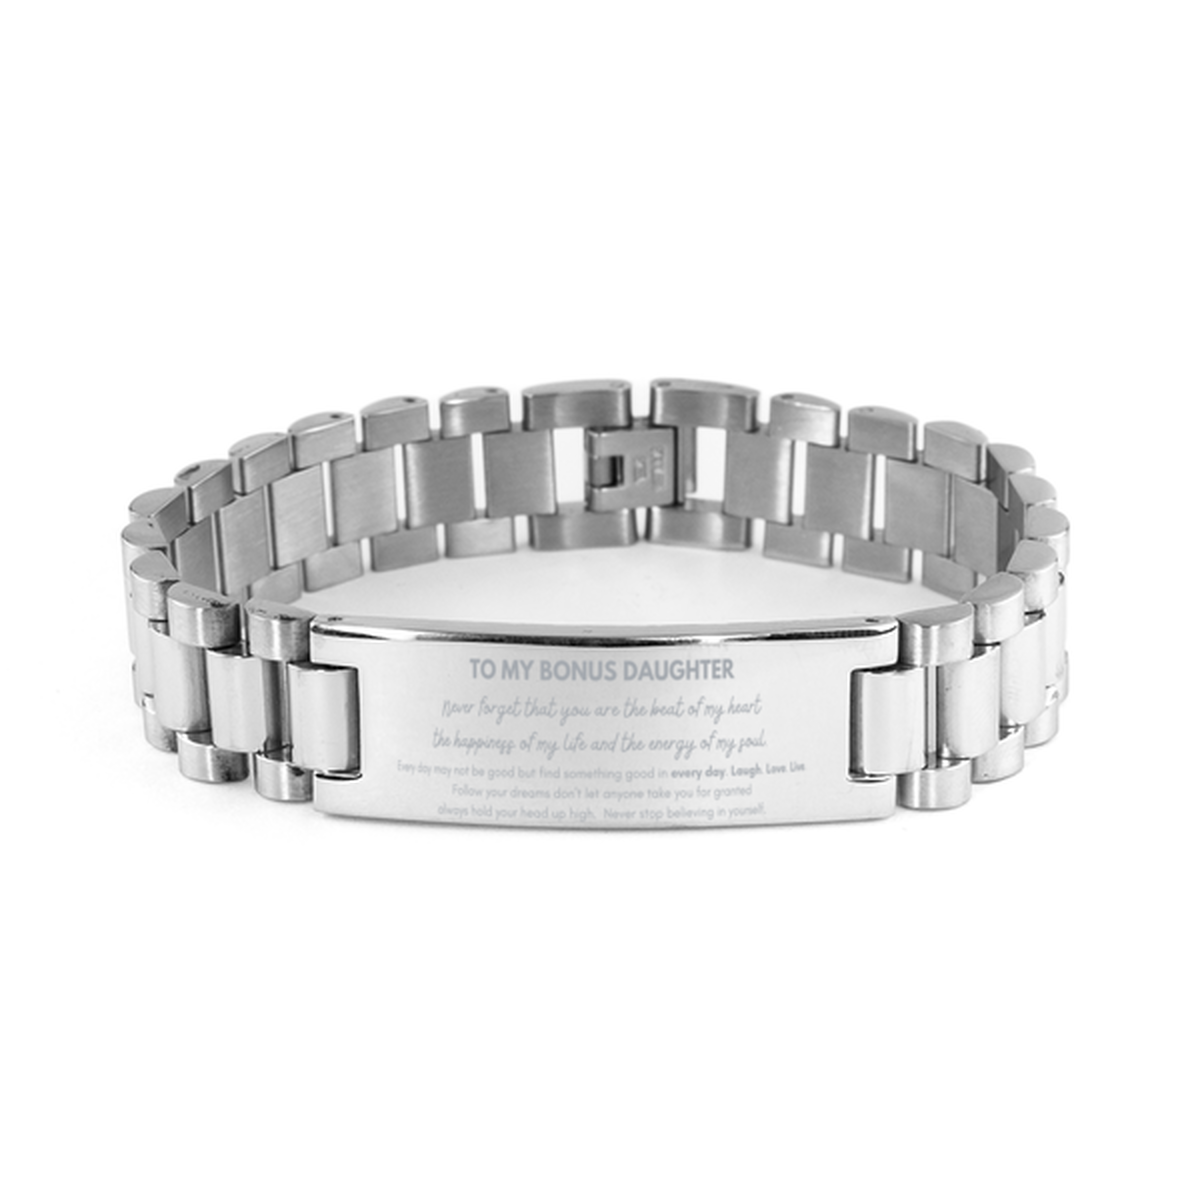 To My Bonus Daughter Bracelet Gifts, Christmas Bonus Daughter Ladder Stainless Steel Bracelet Present, Birthday Unique Motivational For Bonus Daughter, To My Bonus Daughter Never forget that you are the beat of my heart the happiness of my life and the en